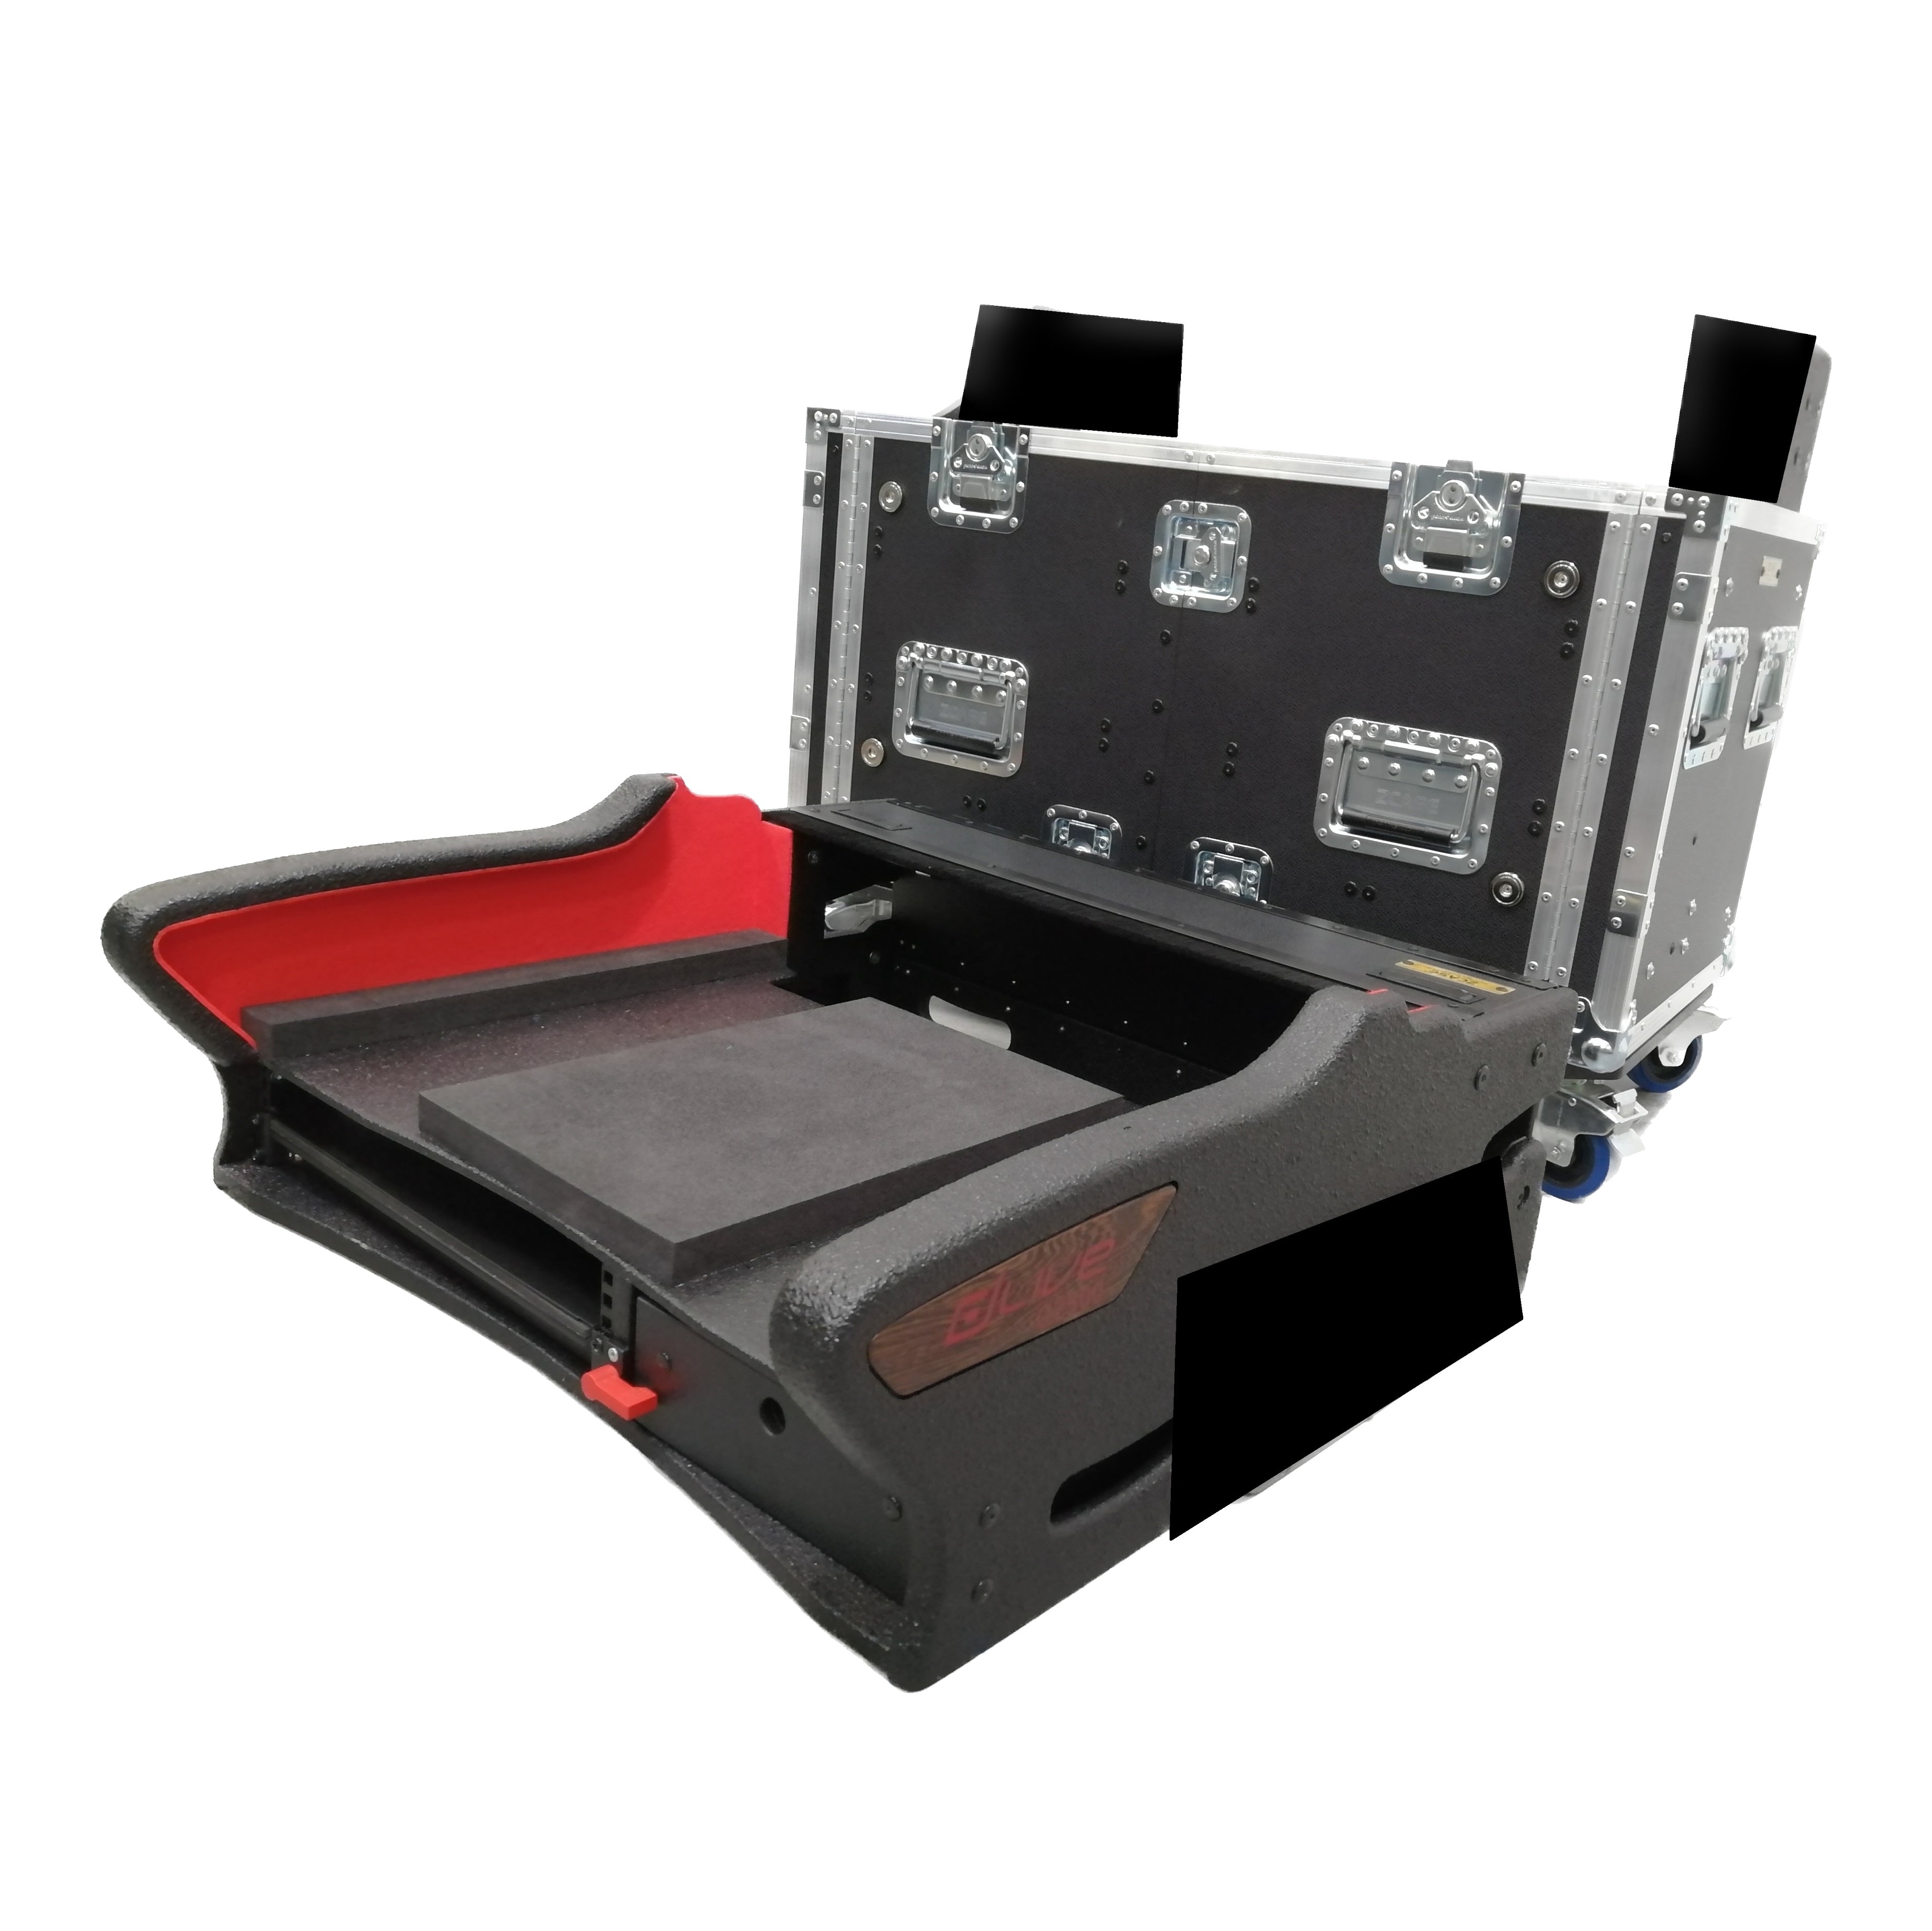 Pro X For Allen and Heath DLive C2500 Flip-Ready Hydraulic Console Easy Retracting Lifting Detachable Case by ZCASE XZF-AH-C2500 D